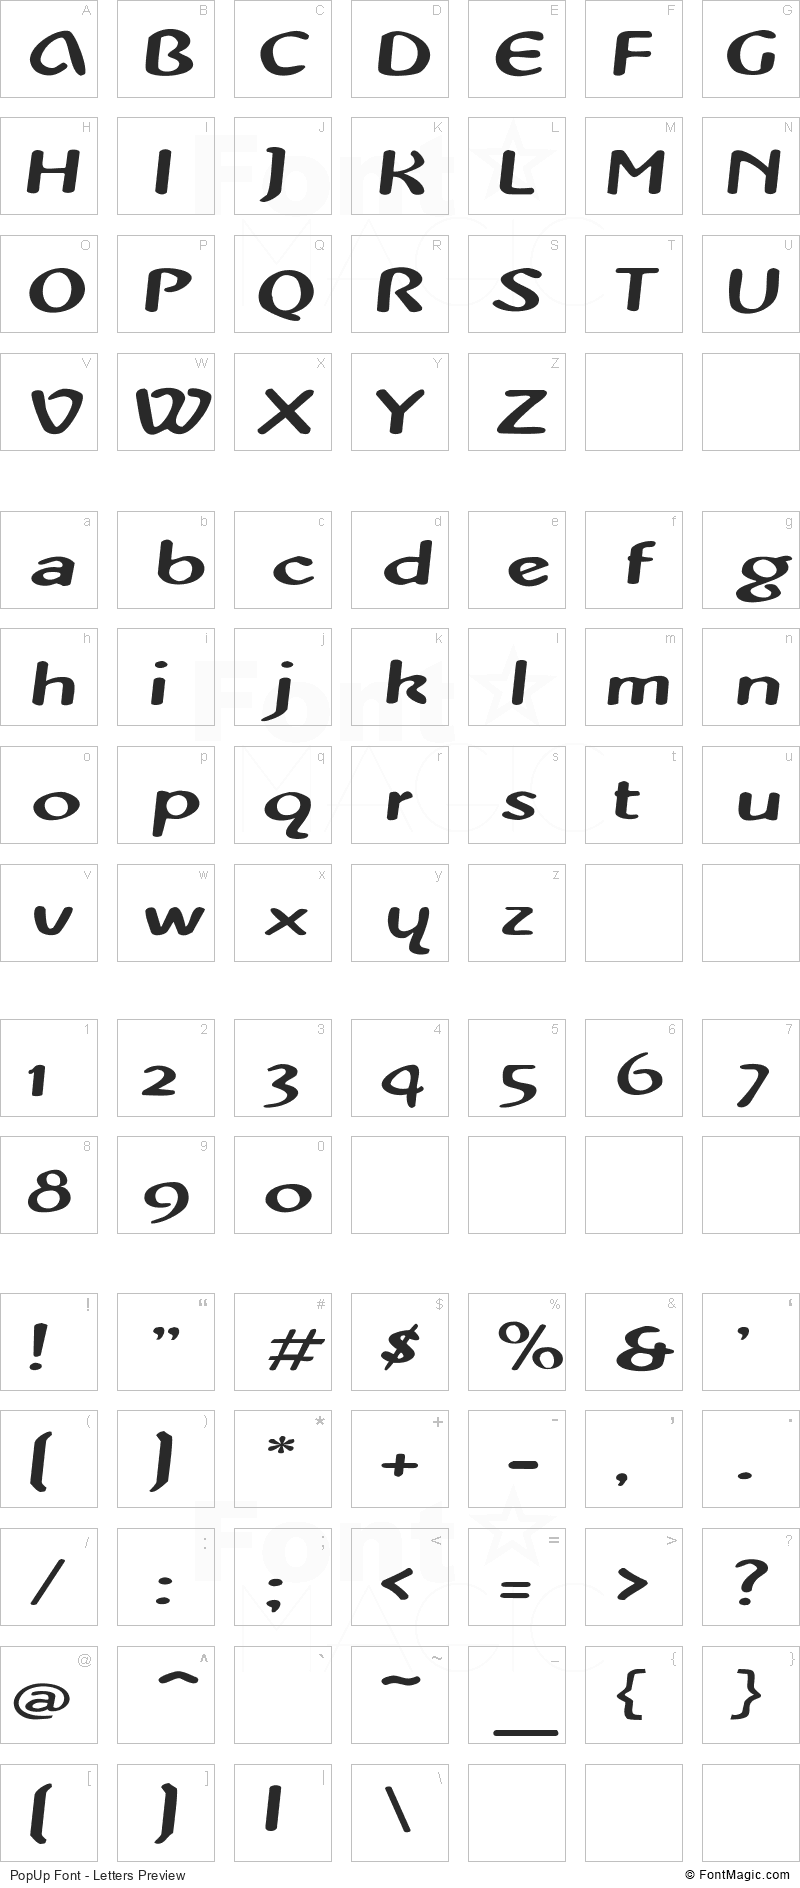 PopUp Font - All Latters Preview Chart